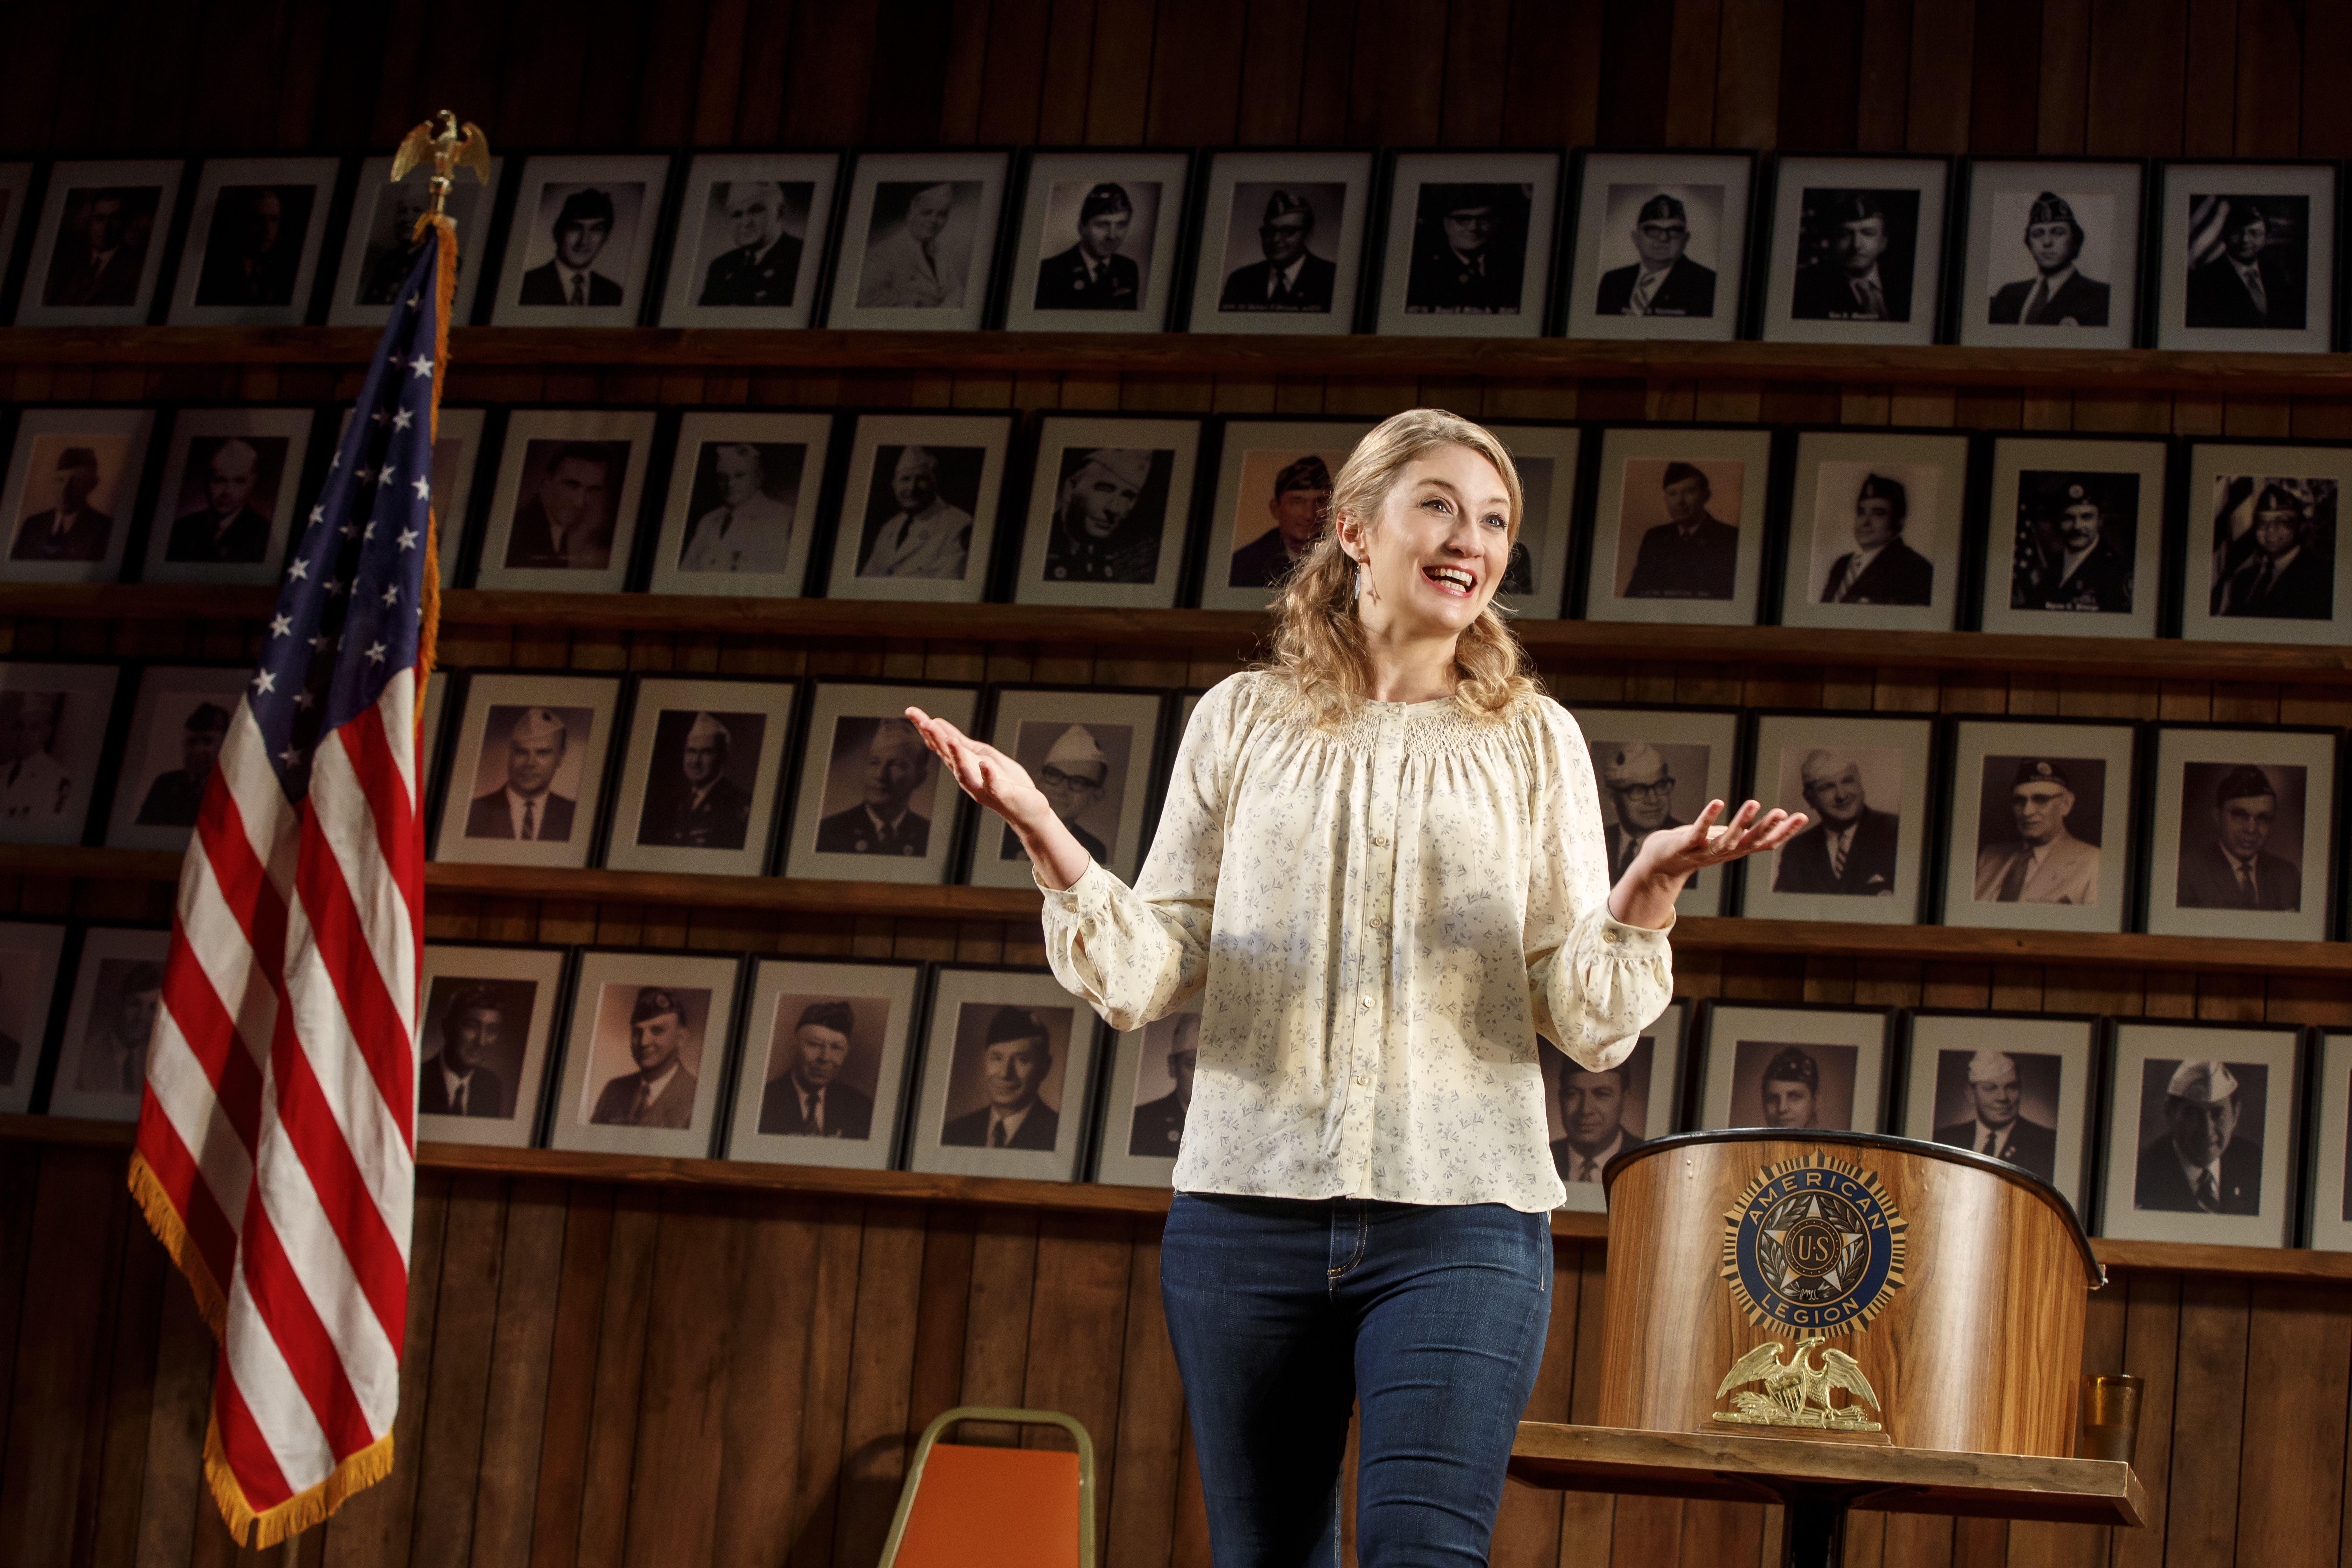 Heidi Schreck in “What the Constitution Means to Me” at New York Theatre Workshop.